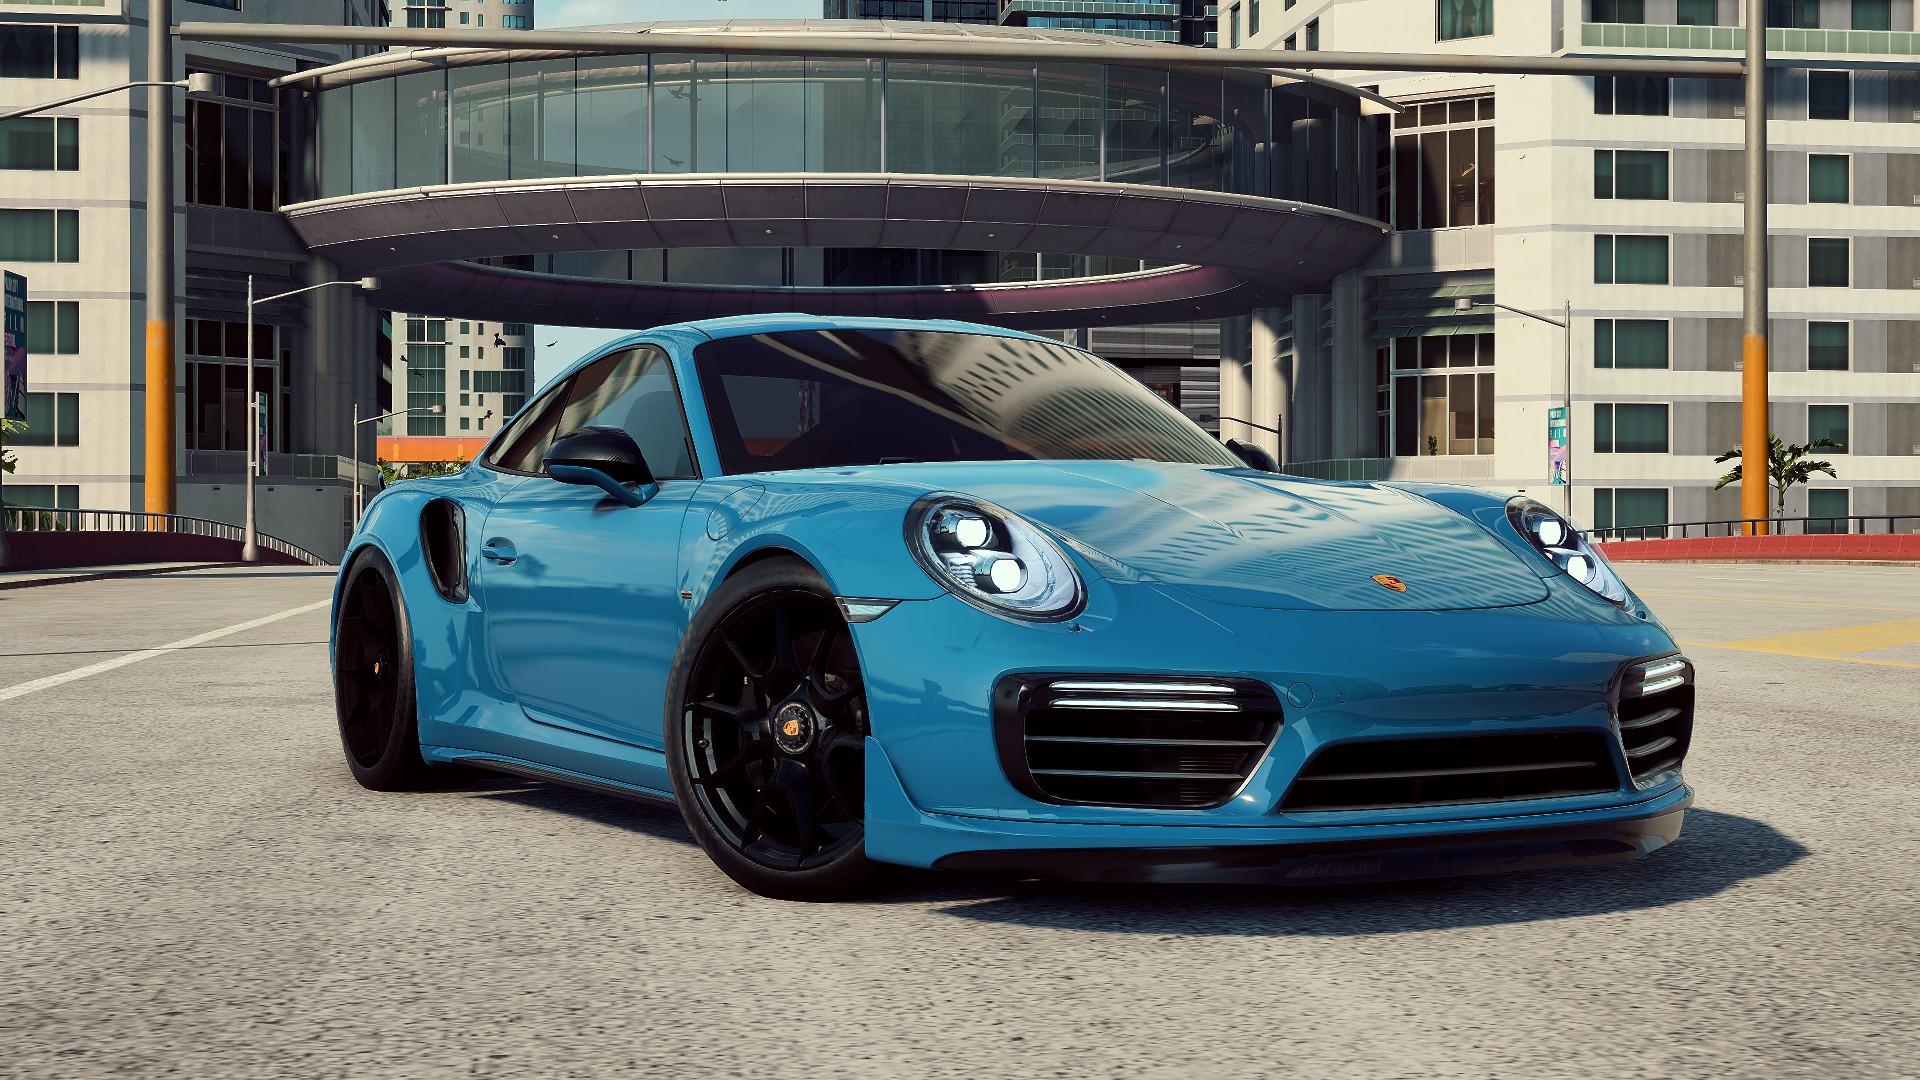 Porsche Car 4K Need For Speed Heat Street View Road City Building Turquoise Red Hot Photoshoot Front 1920x1080